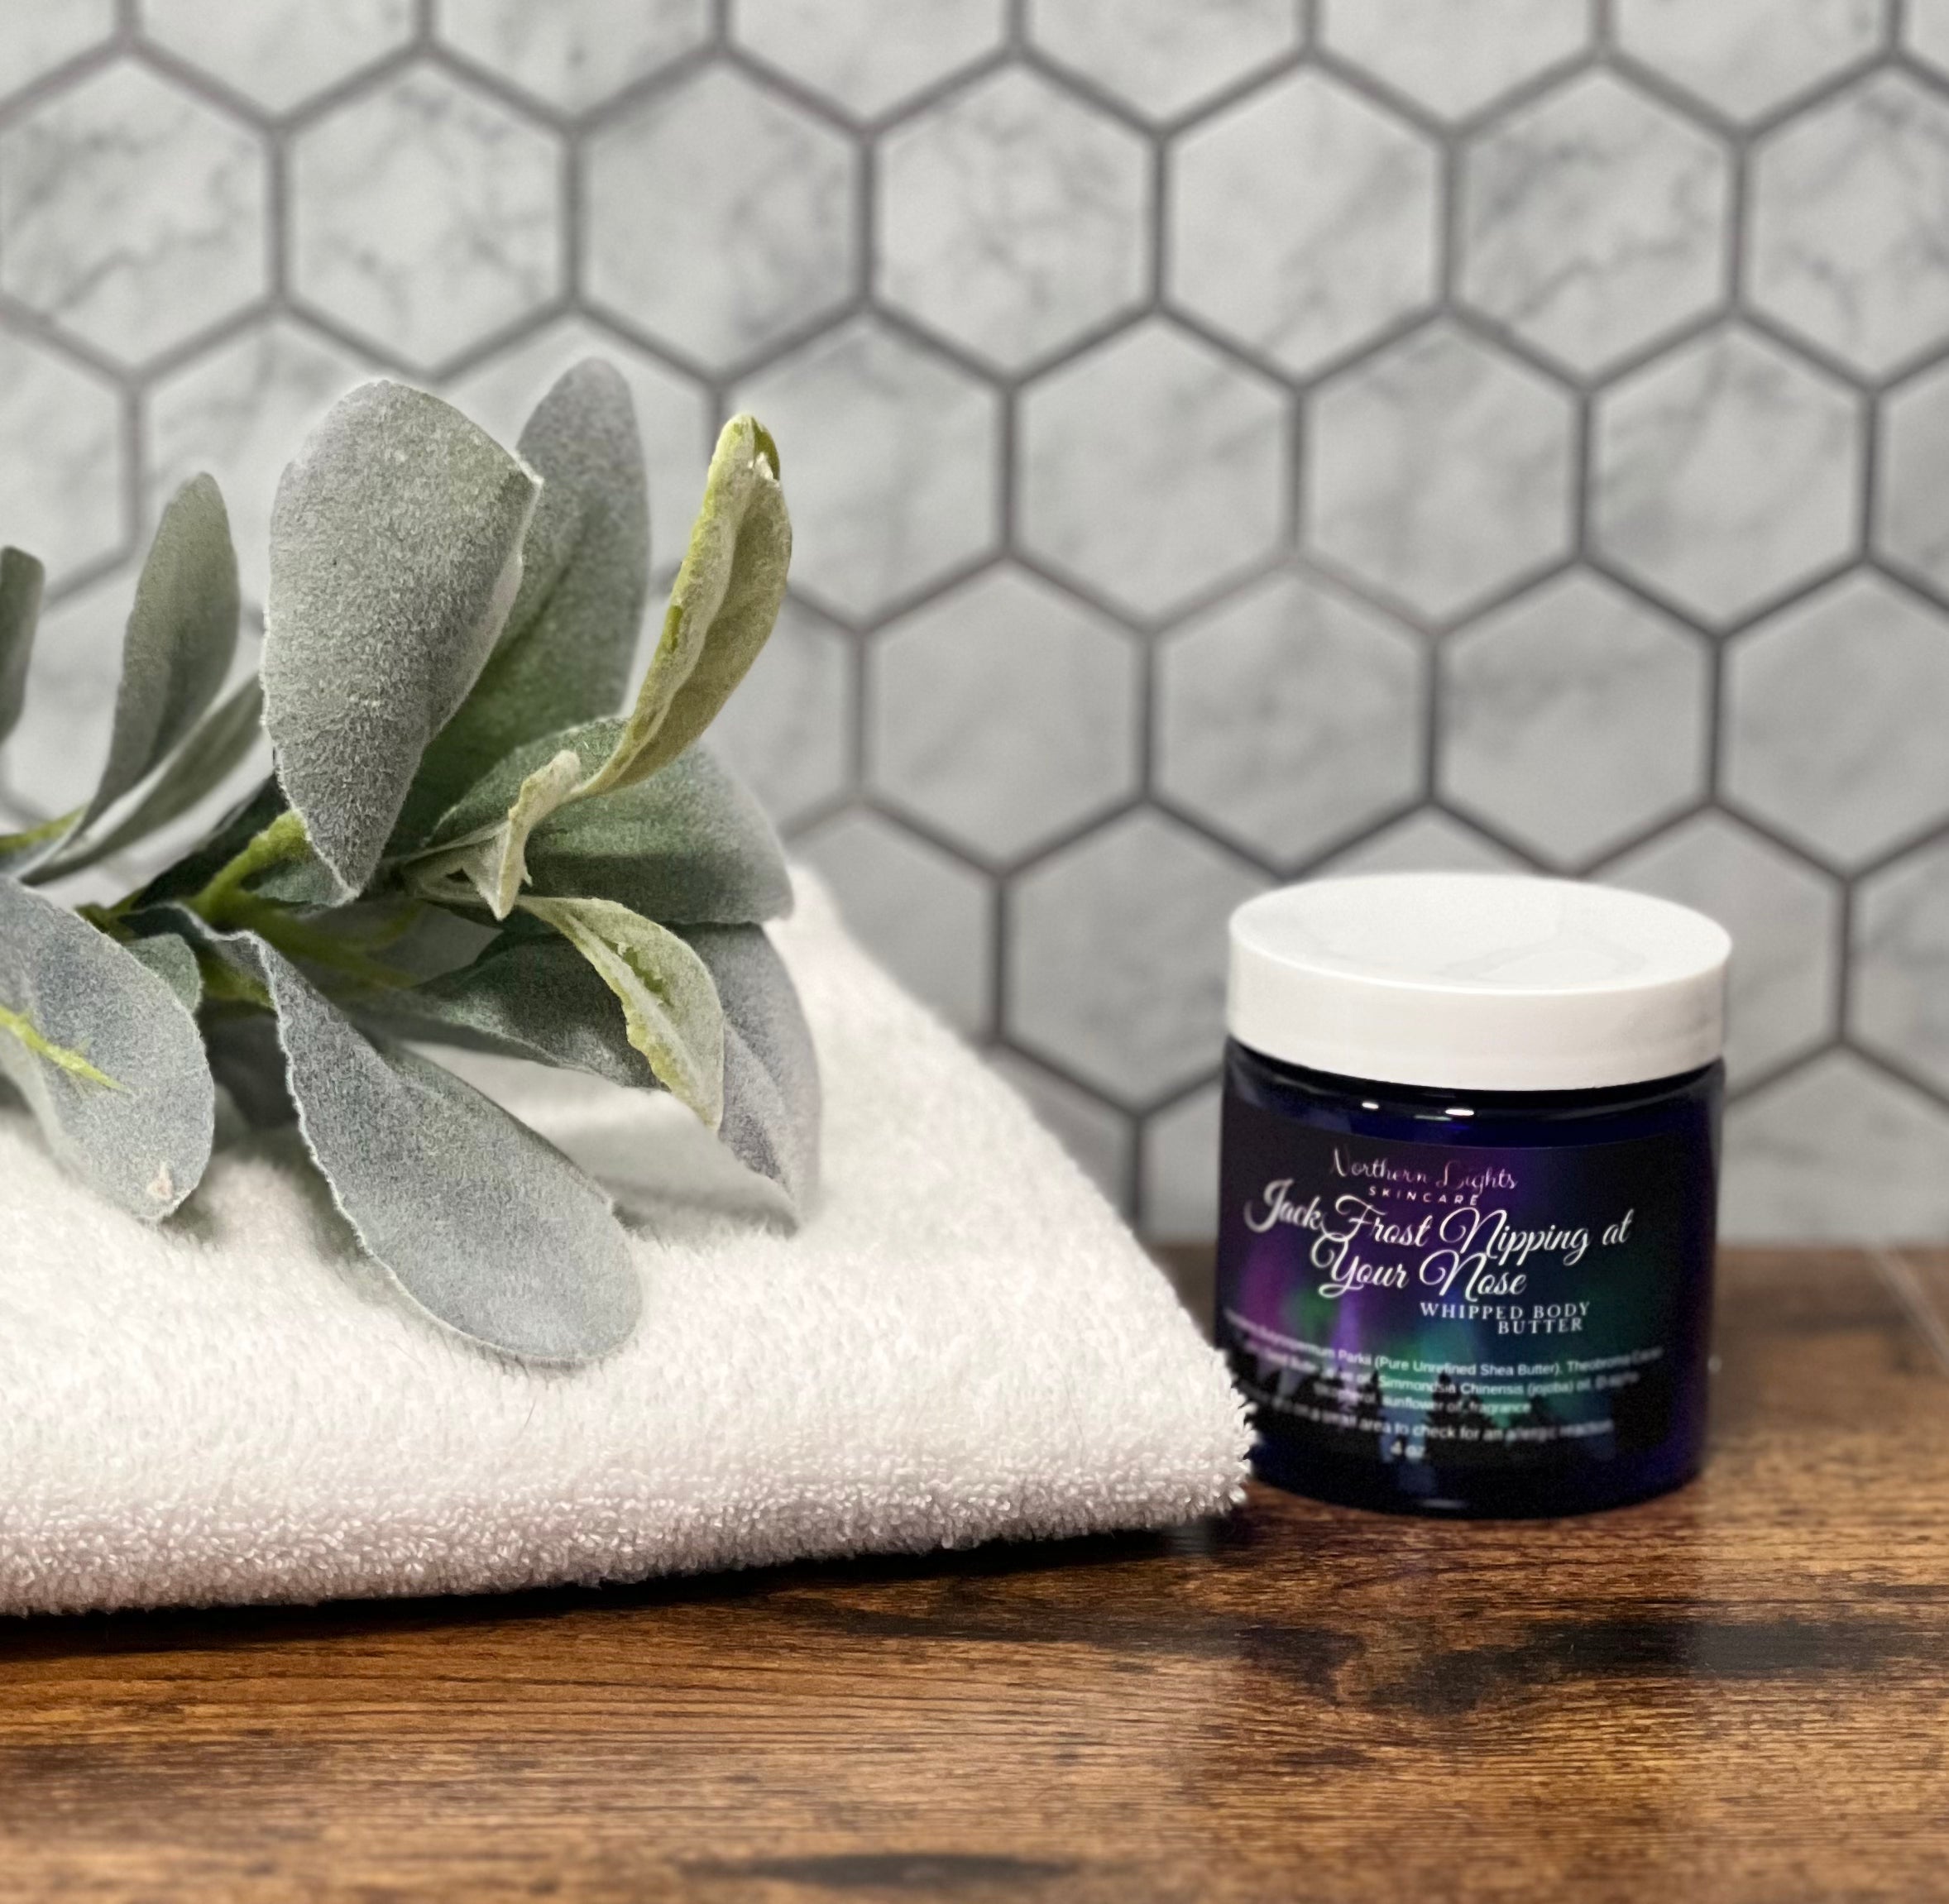 Jack Frost Nipping at Your Nose Whipped Body Butter (retiring)